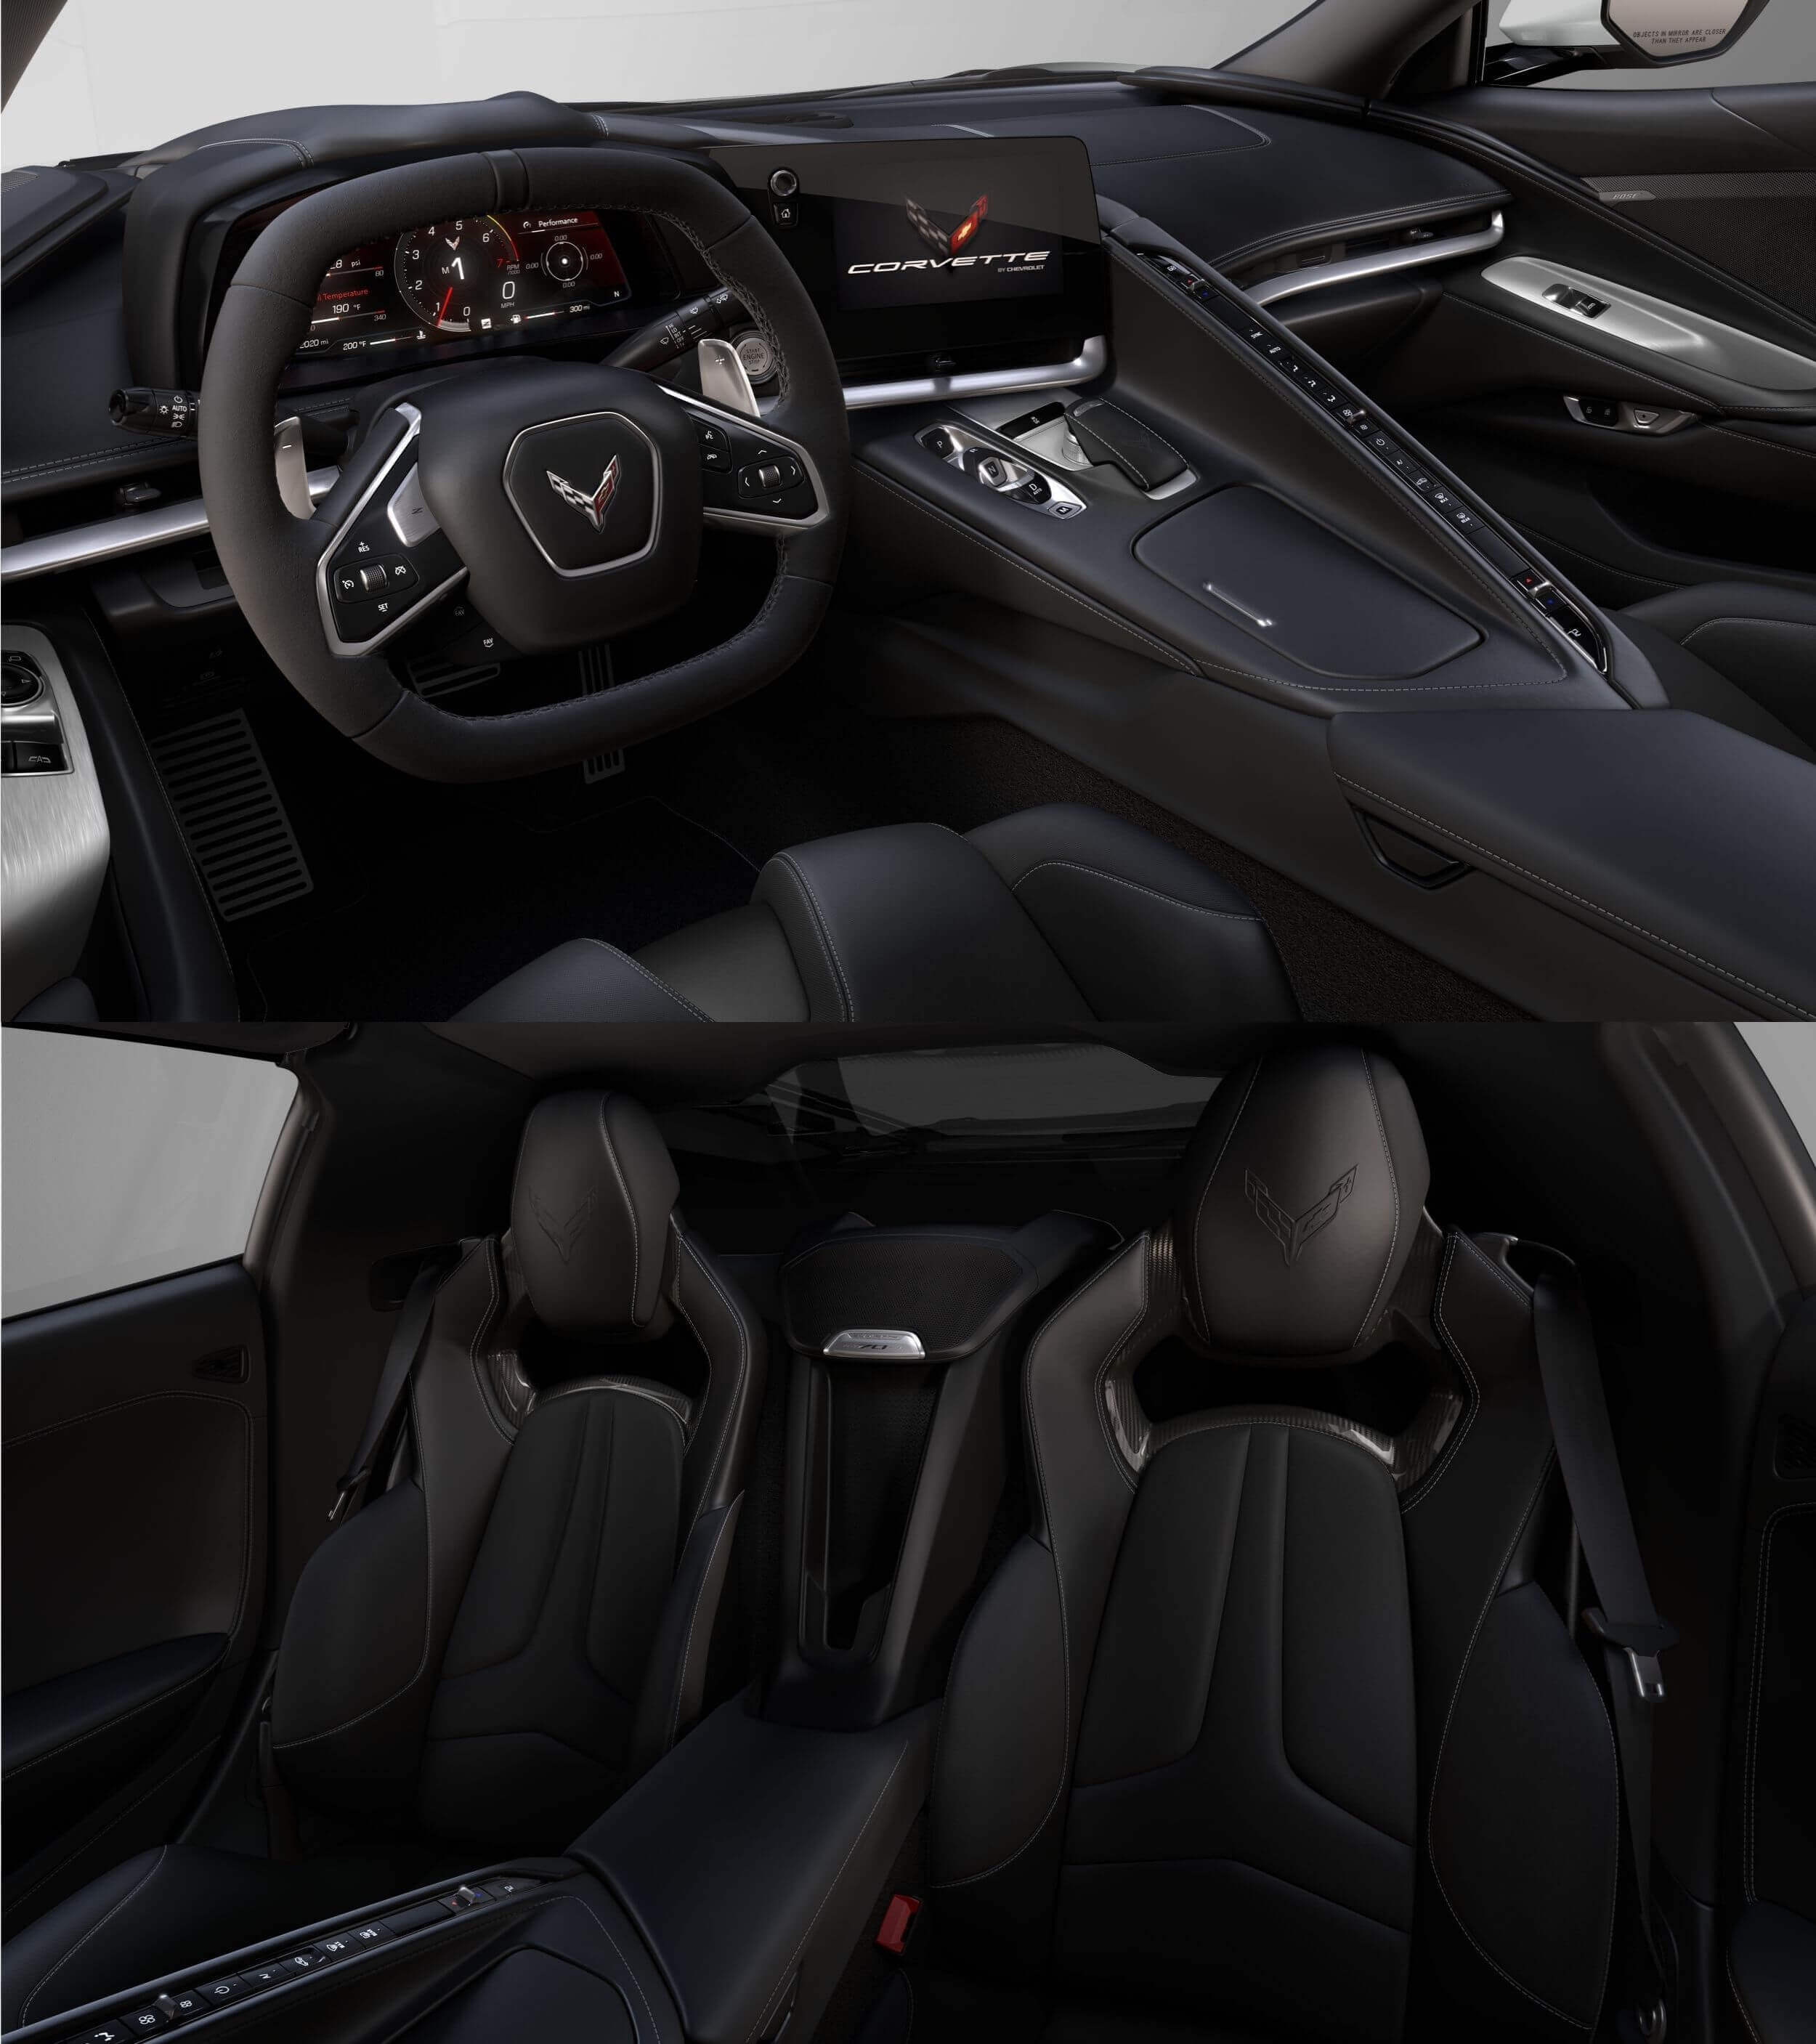 Jet Black with Performance Textile inserts and suede steering wheel